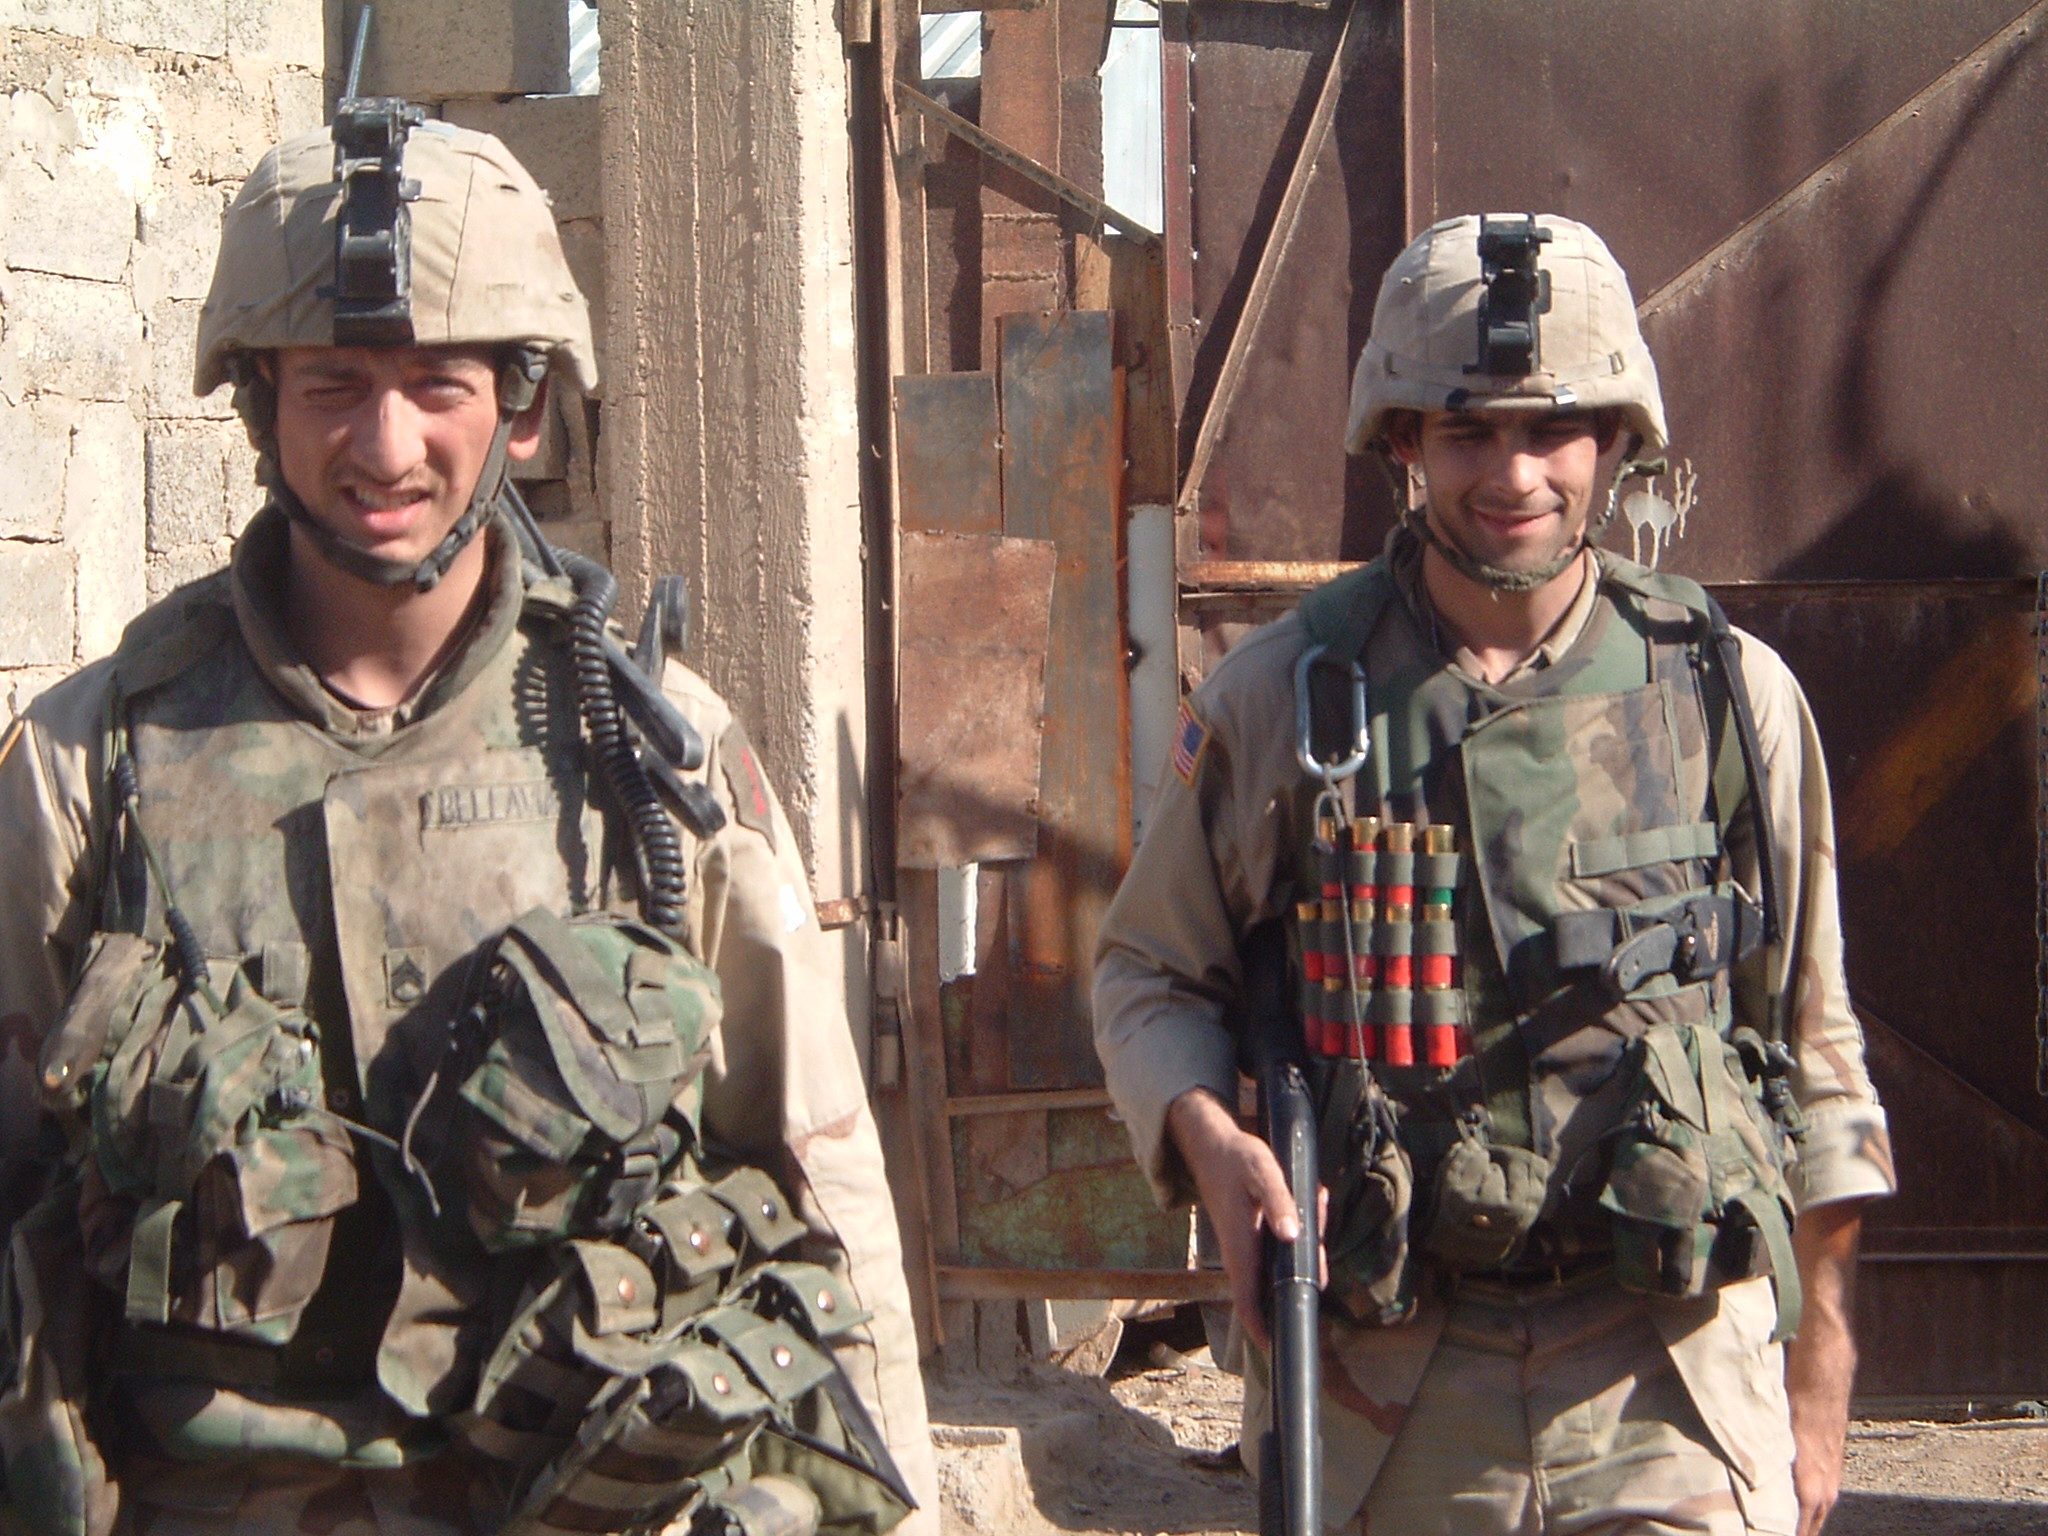 Medal of Honor announced for soldier who fought through three floors of  insurgents in Fallujah